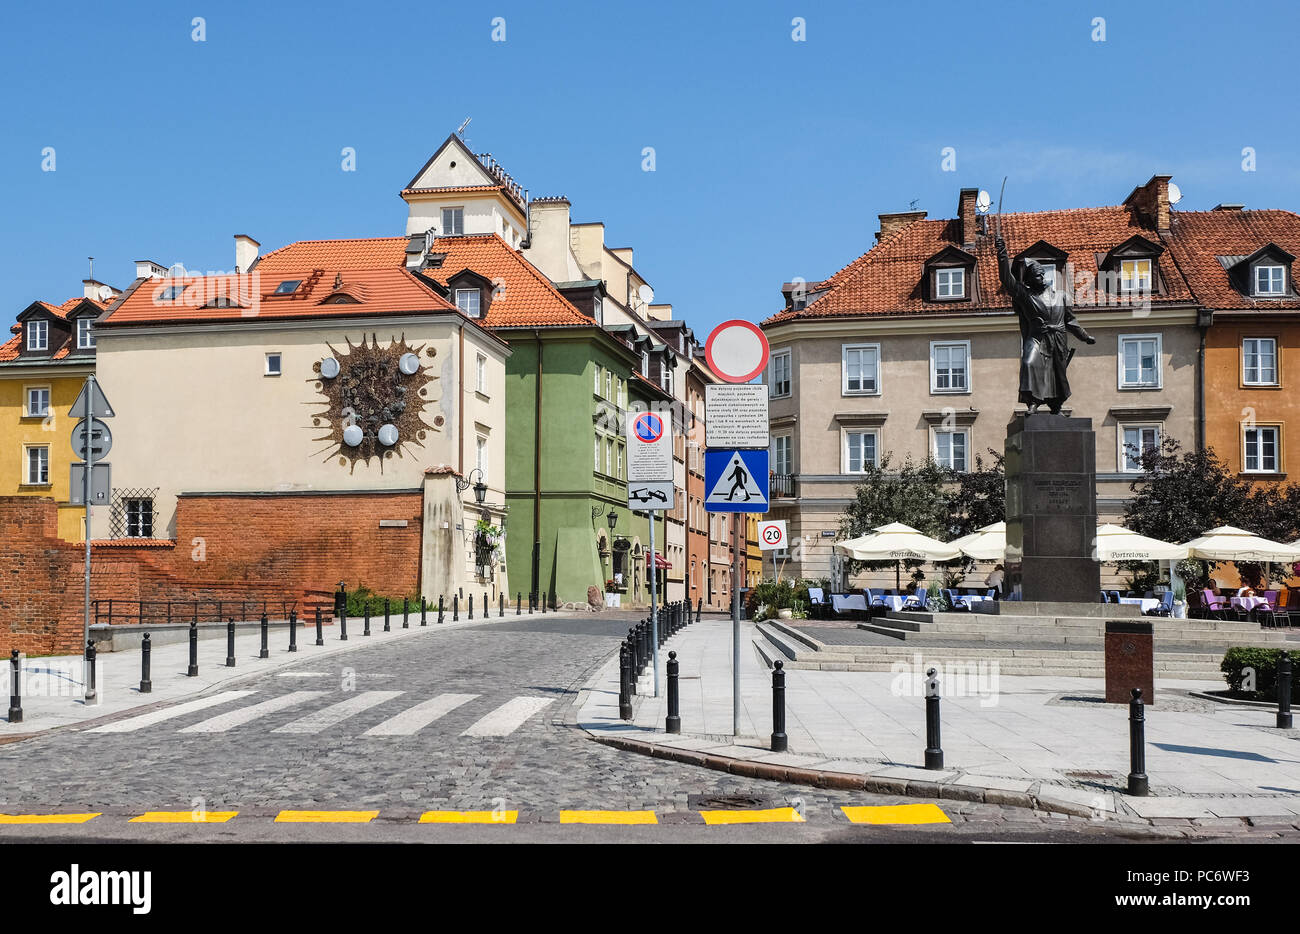 Warsaw, Poland - July 19, 2018: Old town of Warsaw, Poland with monument to Jan KiKilinki and astronomical clock. Stock Photo